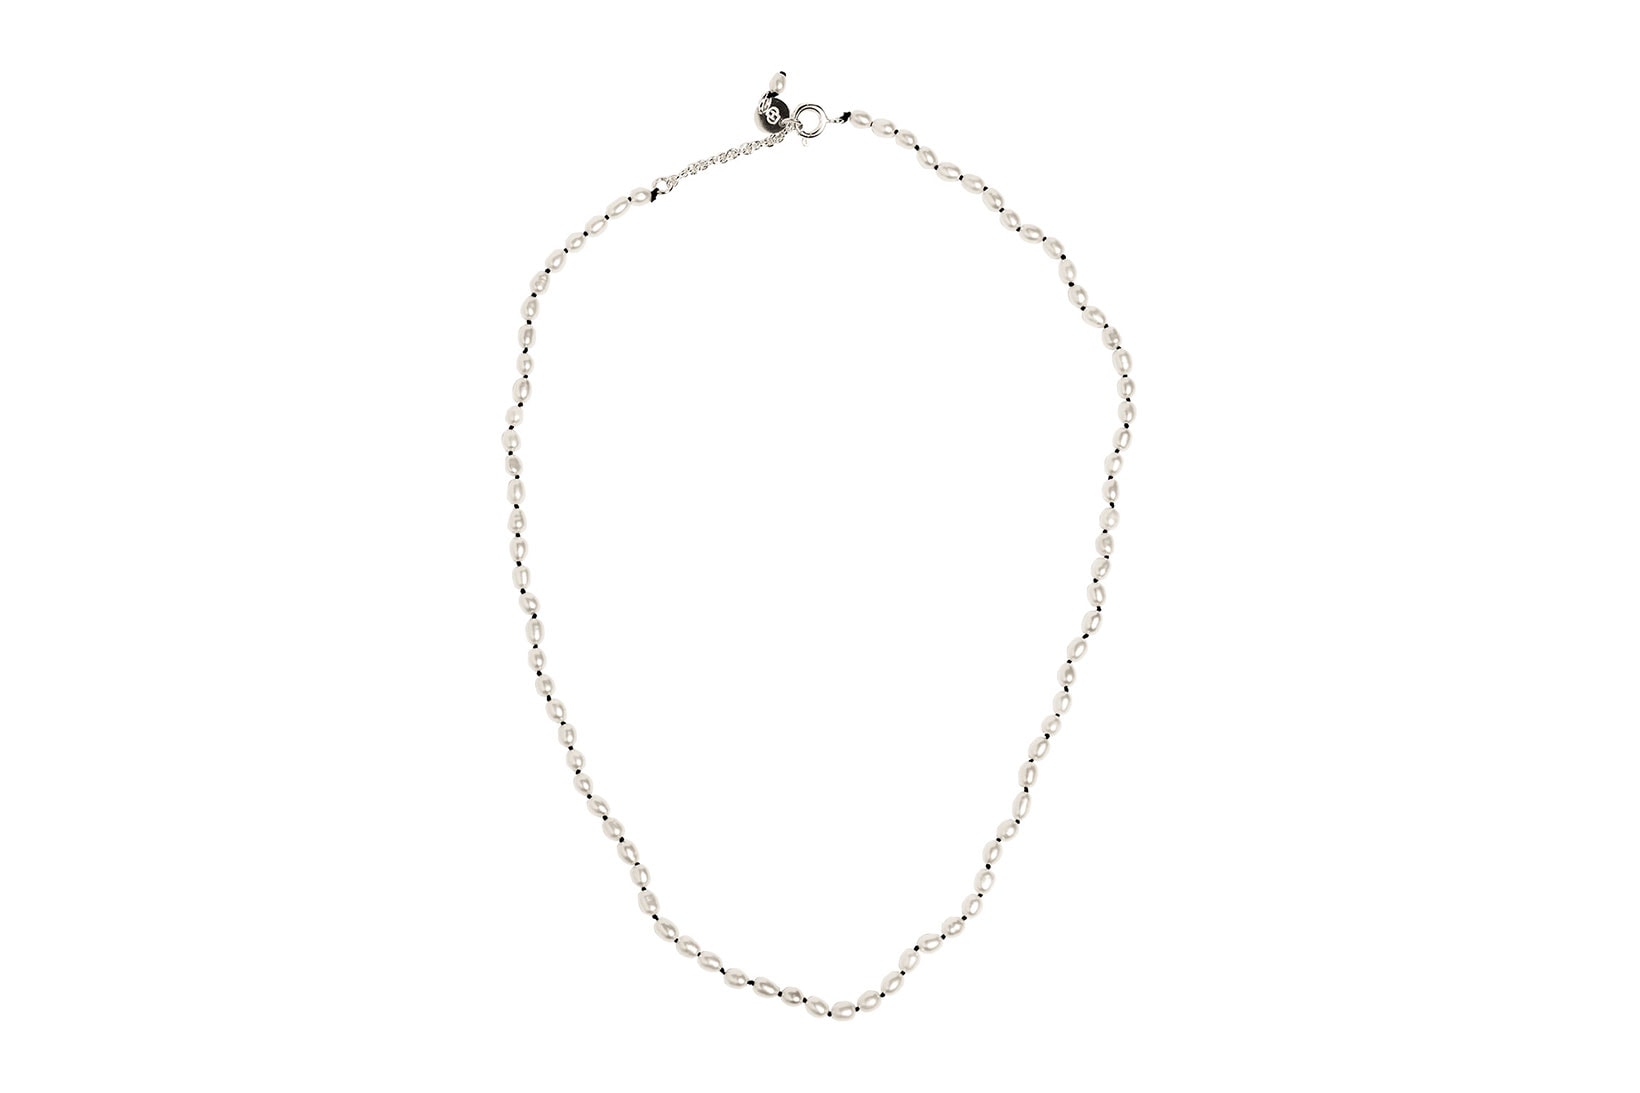 dada dheygere collaboration rice necklace jewelry accessories pearl